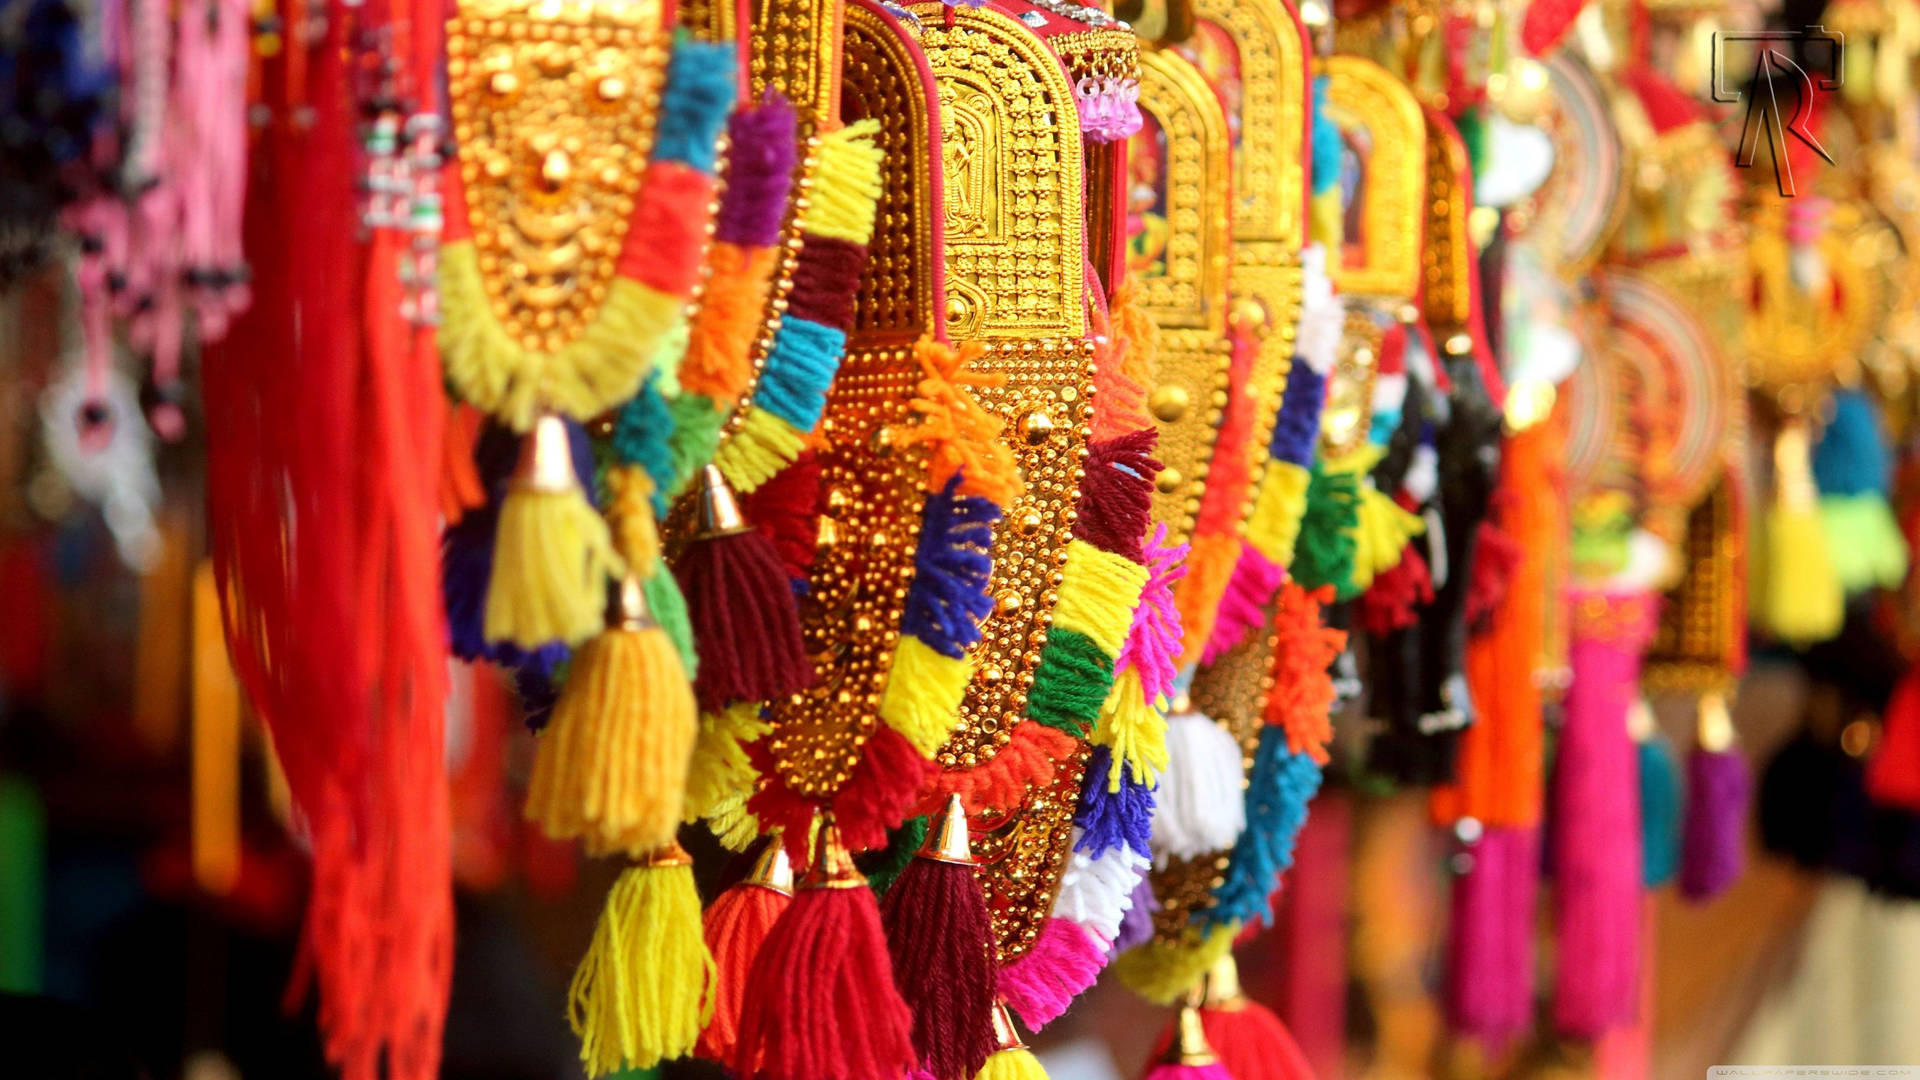 Colorful Necklaces In India